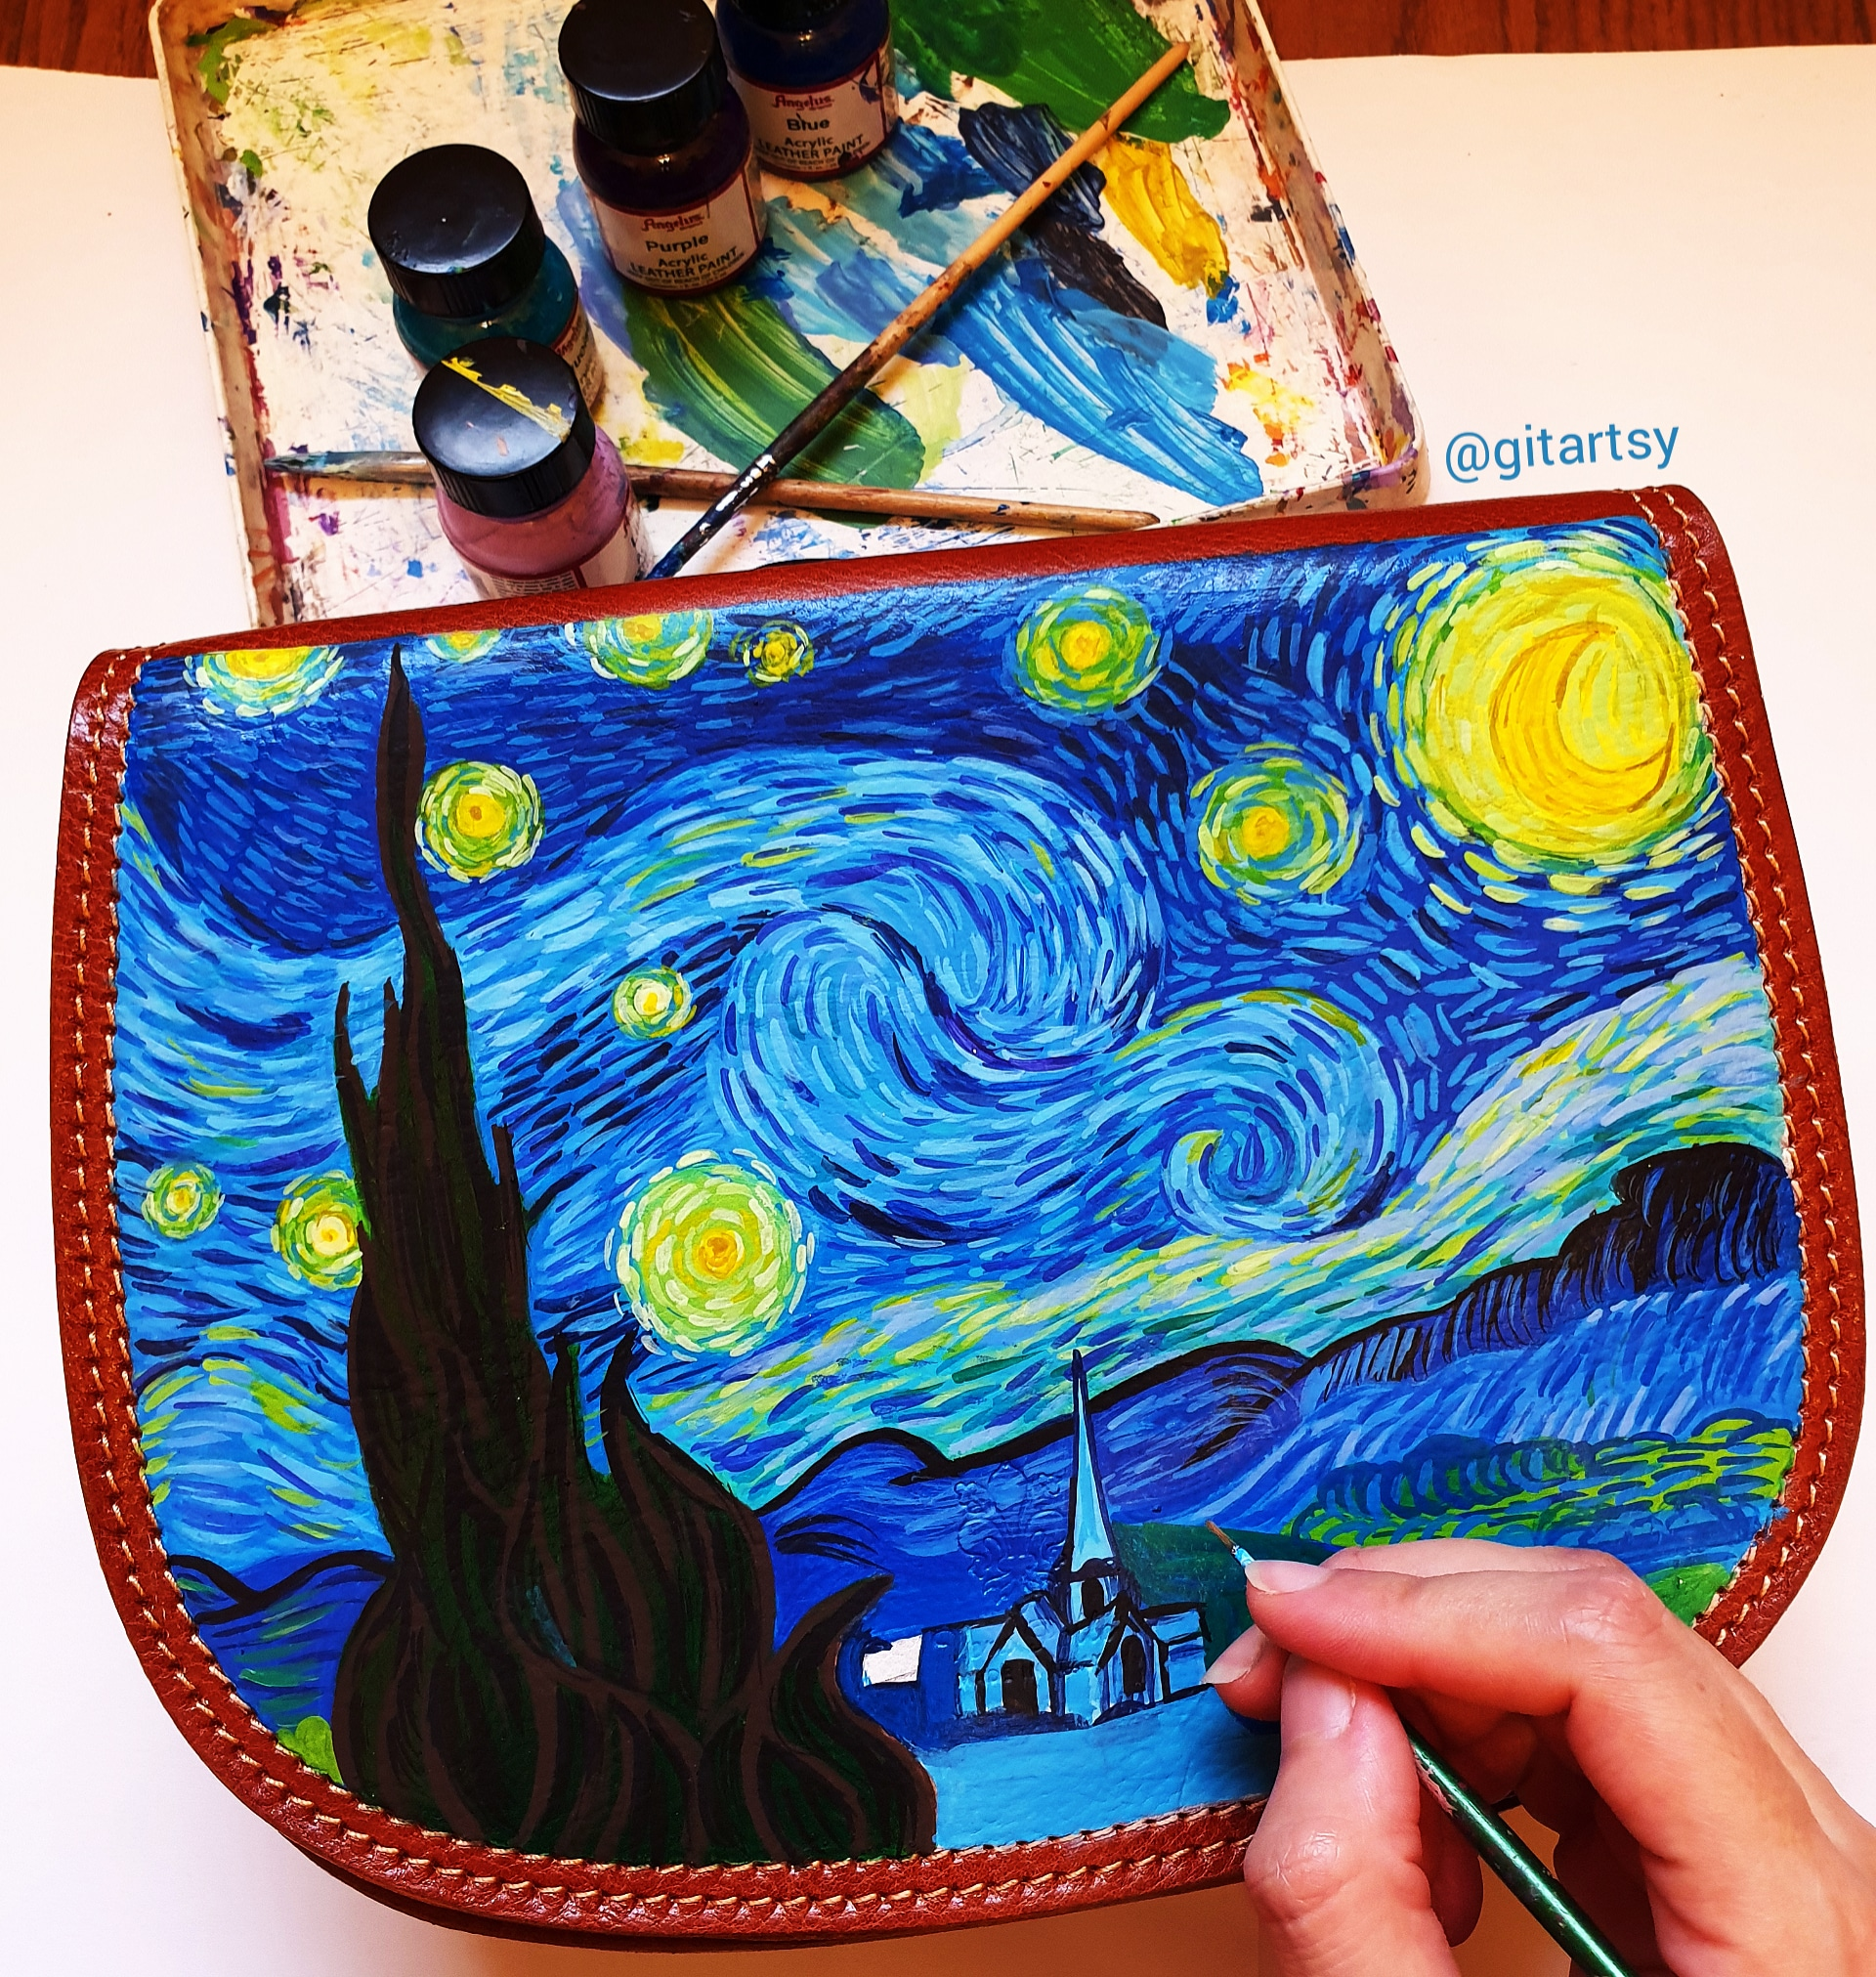 Custom hand painted leather bag - Van Gogh Starry Night being painted on the bag 